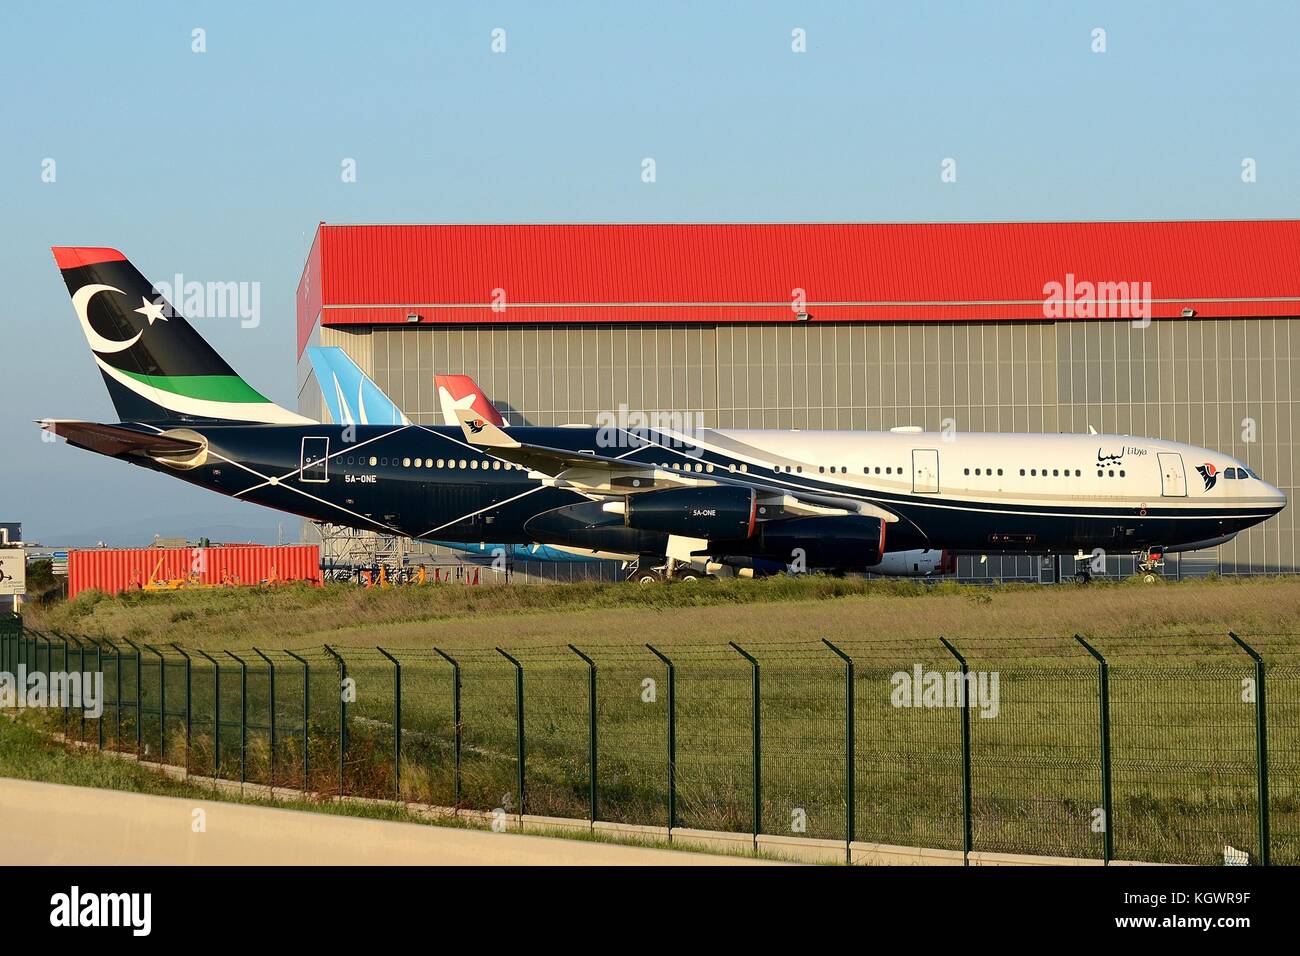 AIRBUS A340 FORMER PERSONAL AIRCRAFT OF COLONEL GADDAFI Stock Photo